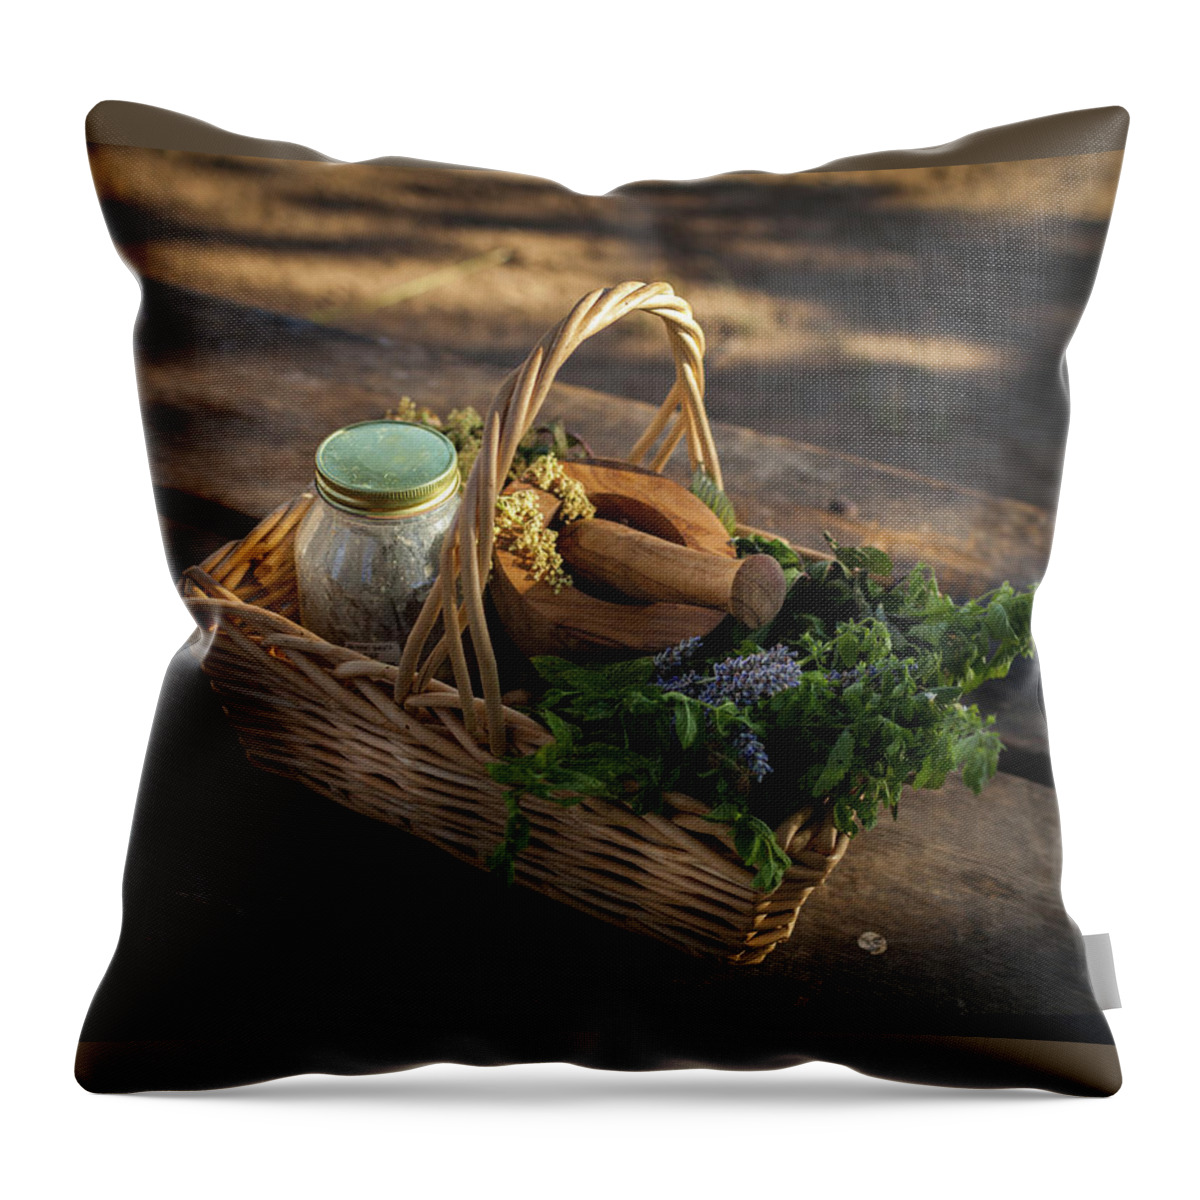 Fotofoxes Throw Pillow featuring the photograph Small Basket by Alexander Fedin